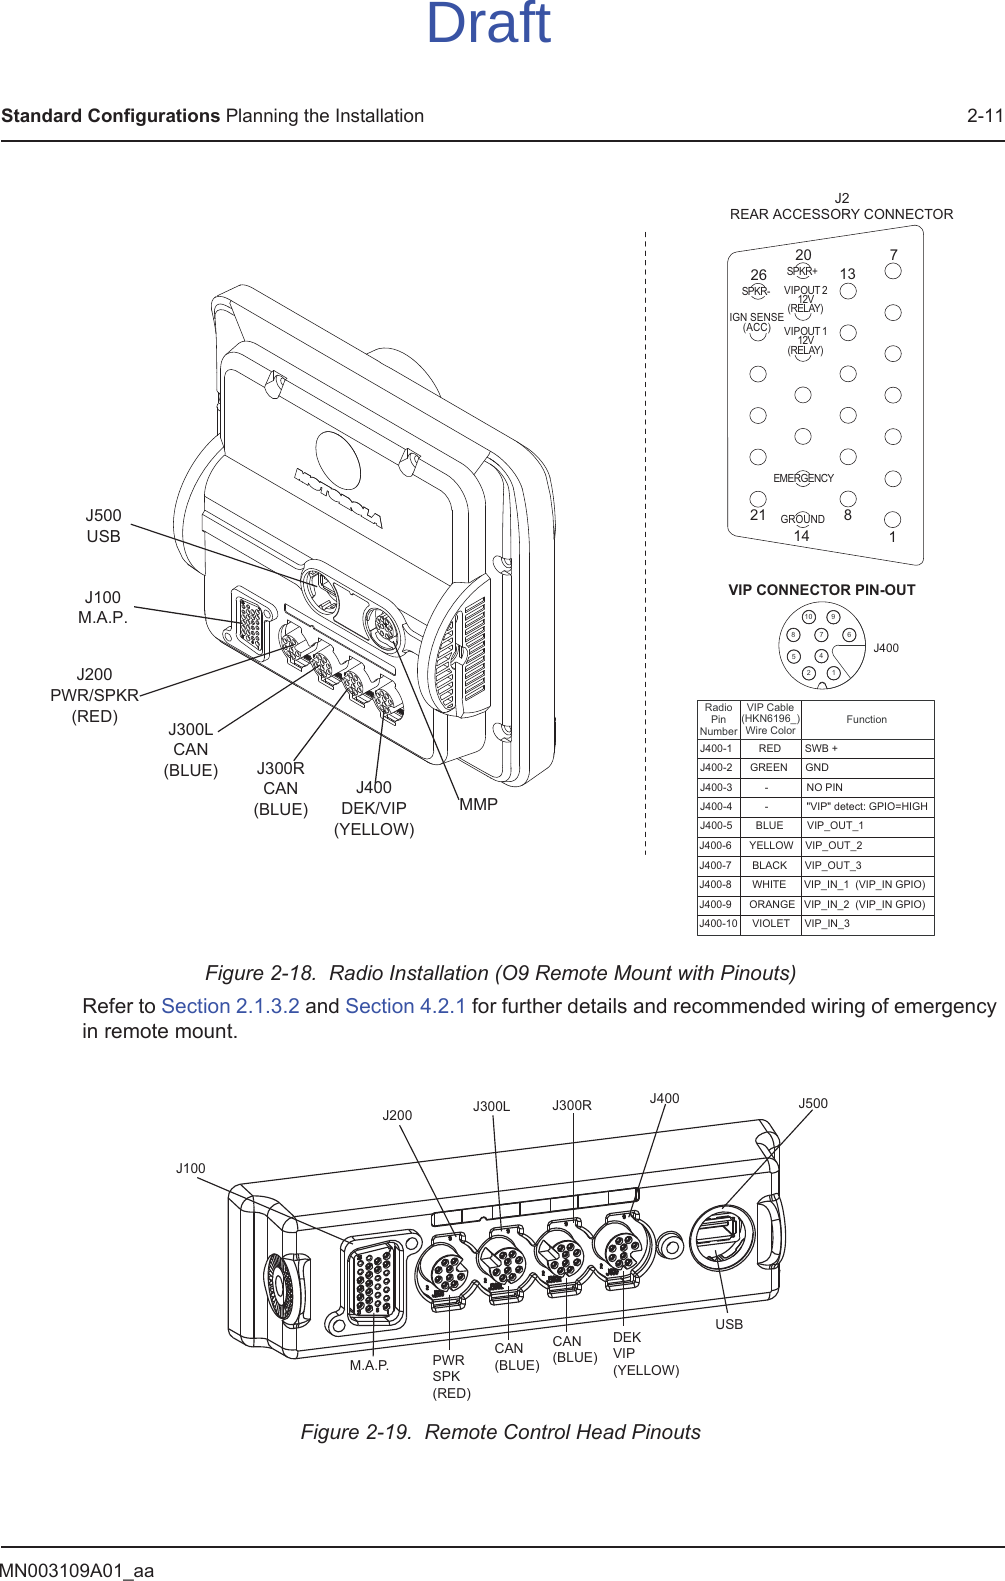 MN003109A01_aaStandard Configurations Planning the Installation 2-11Figure 2-18.  Radio Installation (O9 Remote Mount with Pinouts)Refer to Section 2.1.3.2 and Section 4.2.1 for further details and recommended wiring of emergency in remote mount.Figure 2-19.  Remote Control Head PinoutsVIP CONNECTOR PIN-OUTJ4006910742581J400-1         RED        SWB +J400-2      GREEN      GNDJ400-3           -             NO PINJ400-4           -             &quot;VIP&quot; detect: GPIO=HIGHJ400-5        BLUE        VIP_OUT_1 J400-6      YELLOW    VIP_OUT_2J400-7       BLACK      VIP_OUT_3J400-8       WHITE      VIP_IN_1  (VIP_IN GPIO)J400-9      ORANGE   VIP_IN_2  (VIP_IN GPIO)J400-10     VIOLET     VIP_IN_3 RadioPinNumberVIP Cable(HKN6196_)Wire ColorFunctionJ2REAR ACCESSORY CONNECTOR1781413202126SPKR-SPKR+VIPOUT 212V(RELAY)VIPOUT 112V(RELAY)GROUNDEMERGENCYIGN SENSE(ACC)MMPJ400DEK/VIP(YELLOW)J300RCAN(BLUE)J500USBJ100M.A.P.J200PWR/SPKR(RED) J300LCAN(BLUE)M.A.P.  PWRSPK (RED)CAN(BLUE)CAN(BLUE)DEKVIP(YELLOW)USBJ100J200 J300L J300R J400 J500Draft